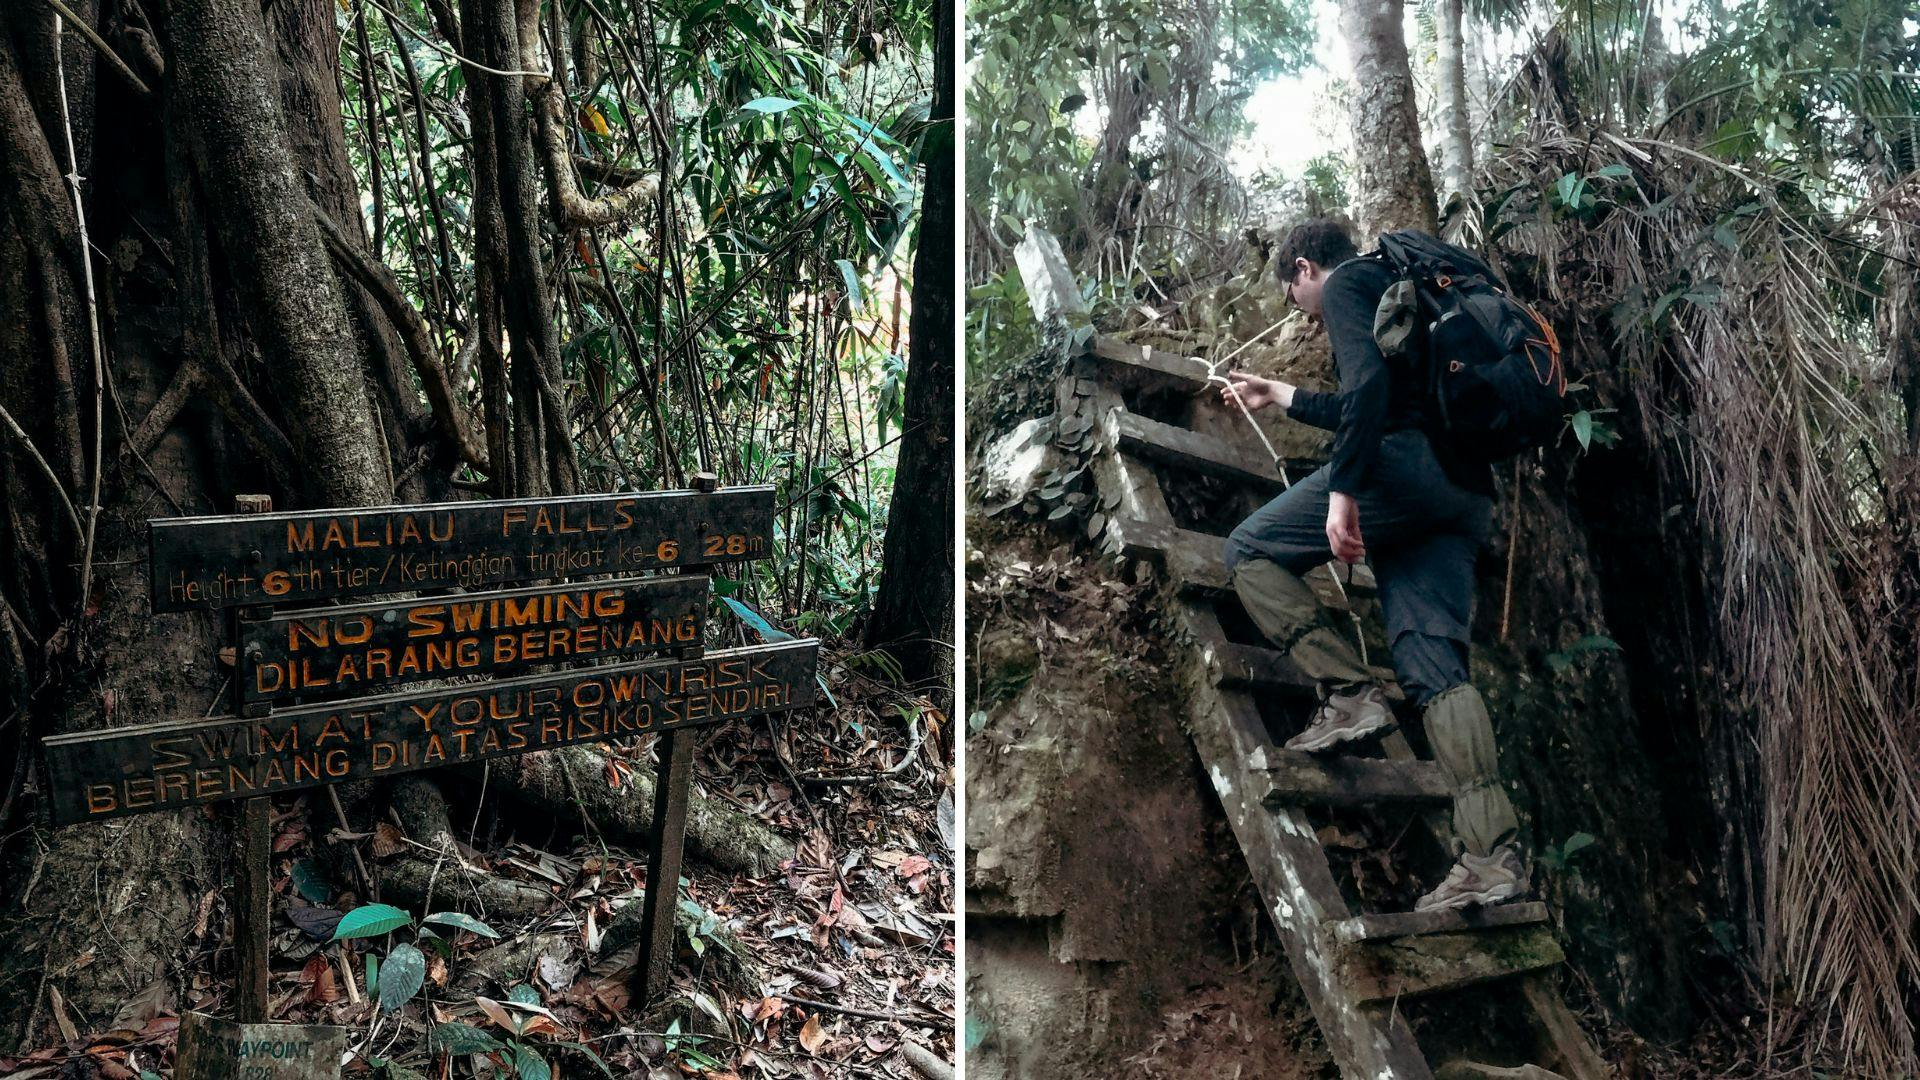 You'll be navigating steep forested trails and rickety ladders to get to Maliau Falls